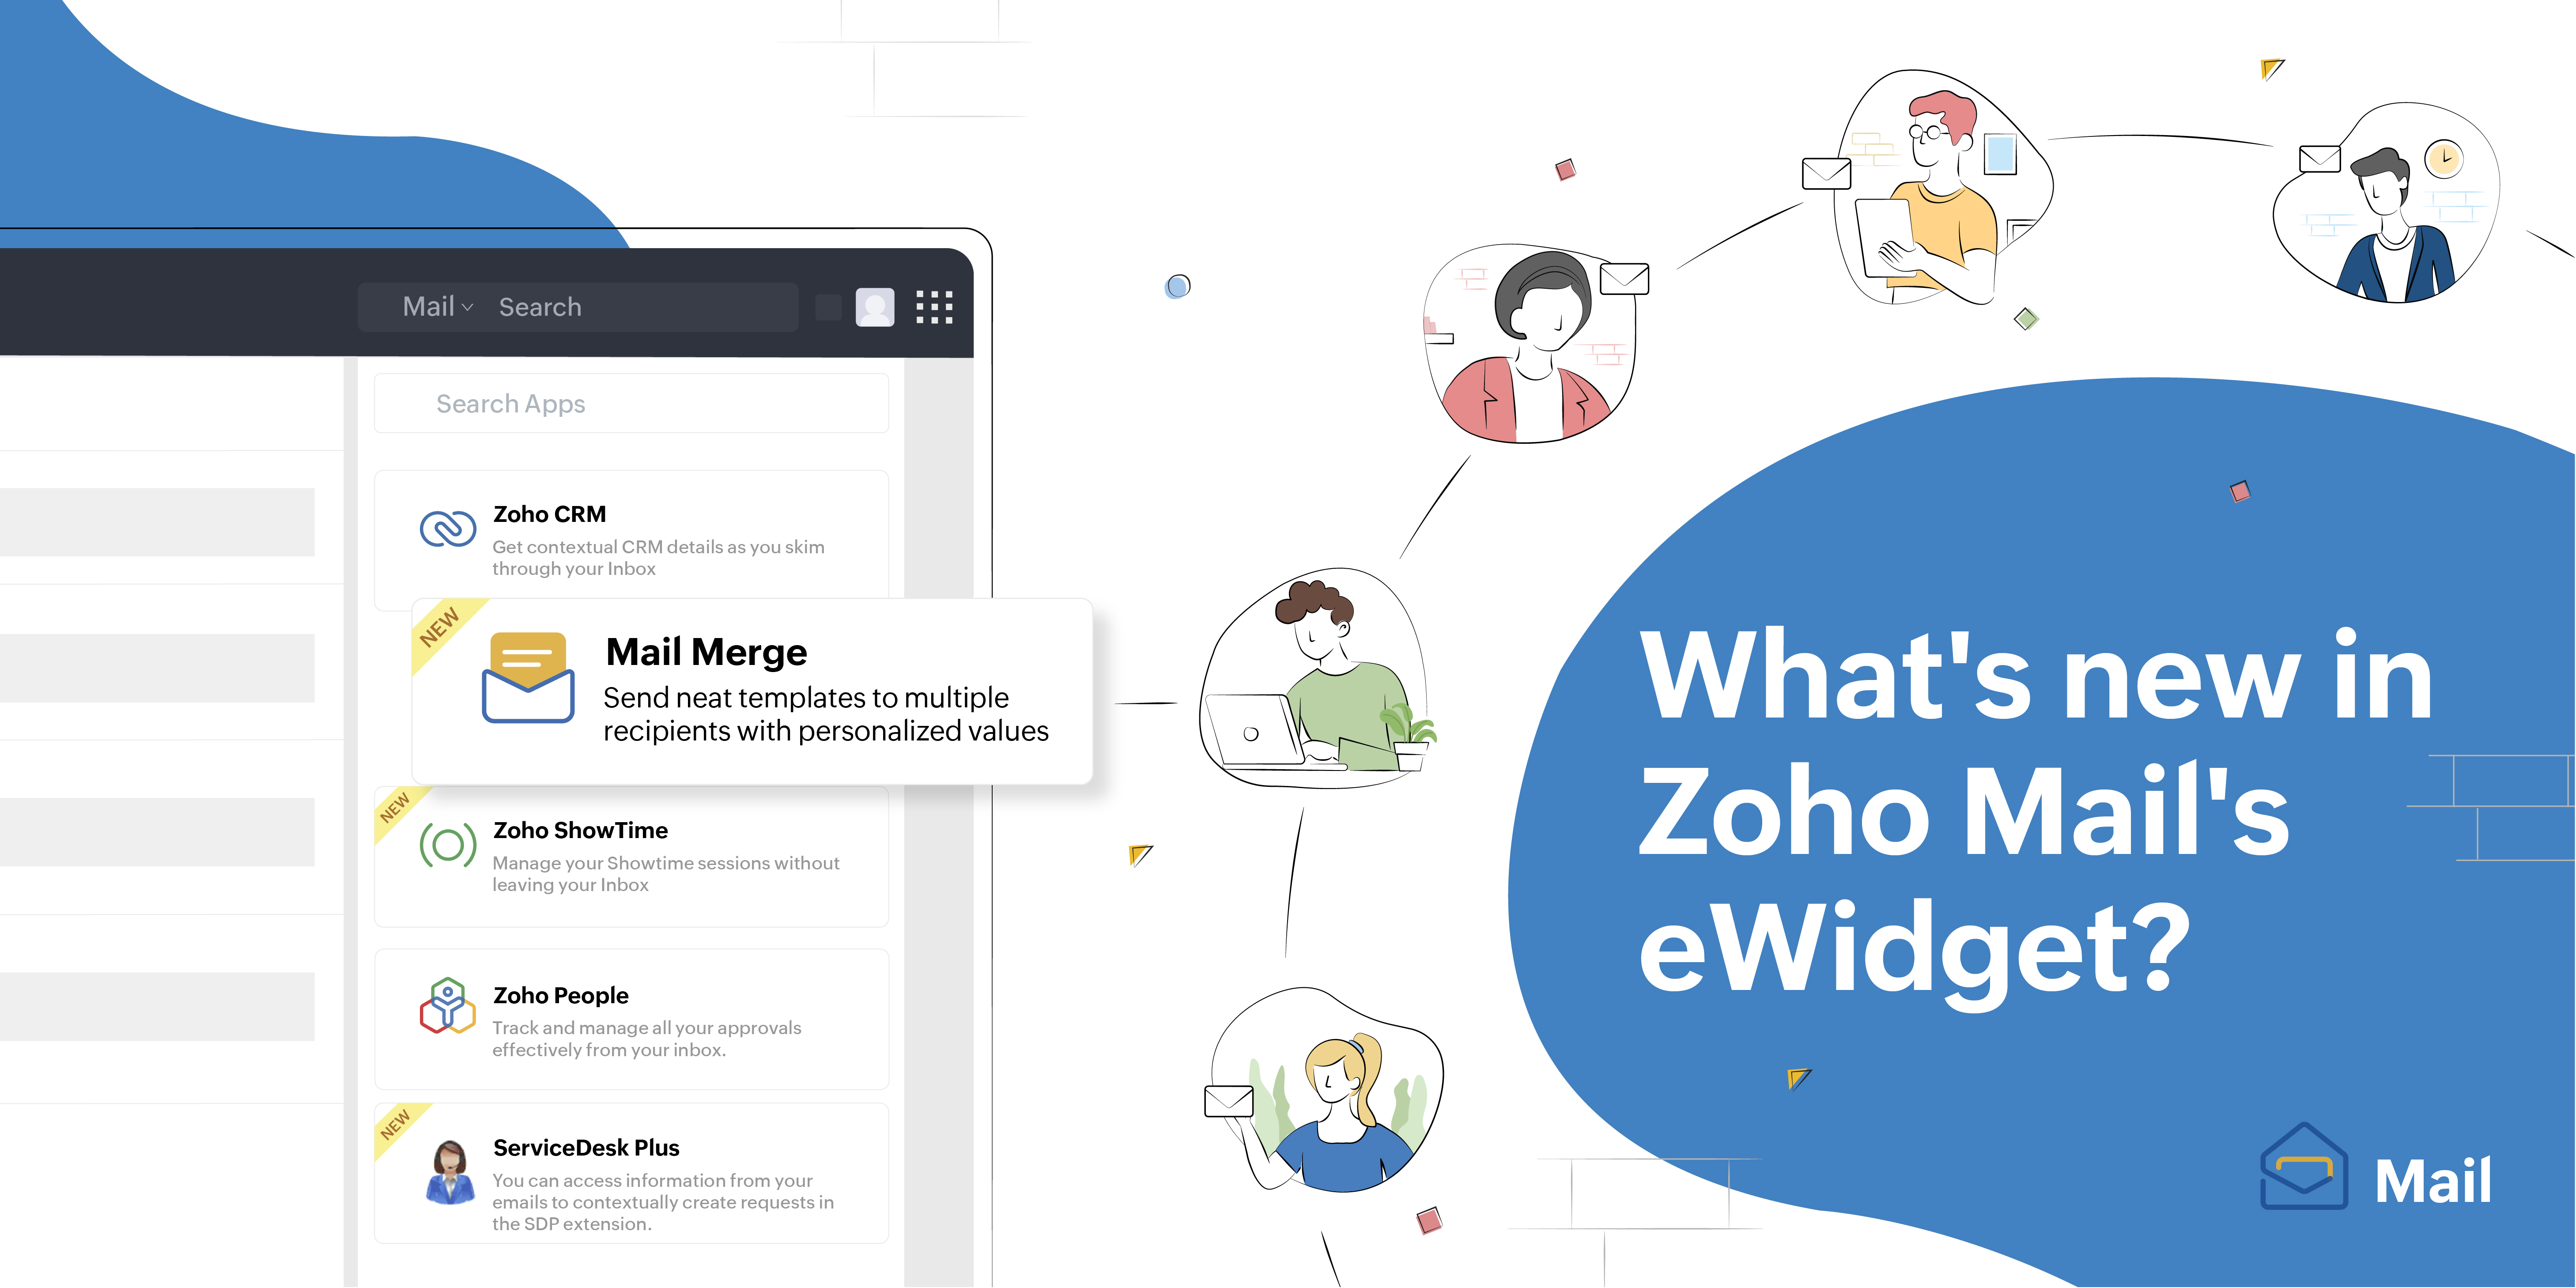 Latest additions to eWidget: Mail Merge and more